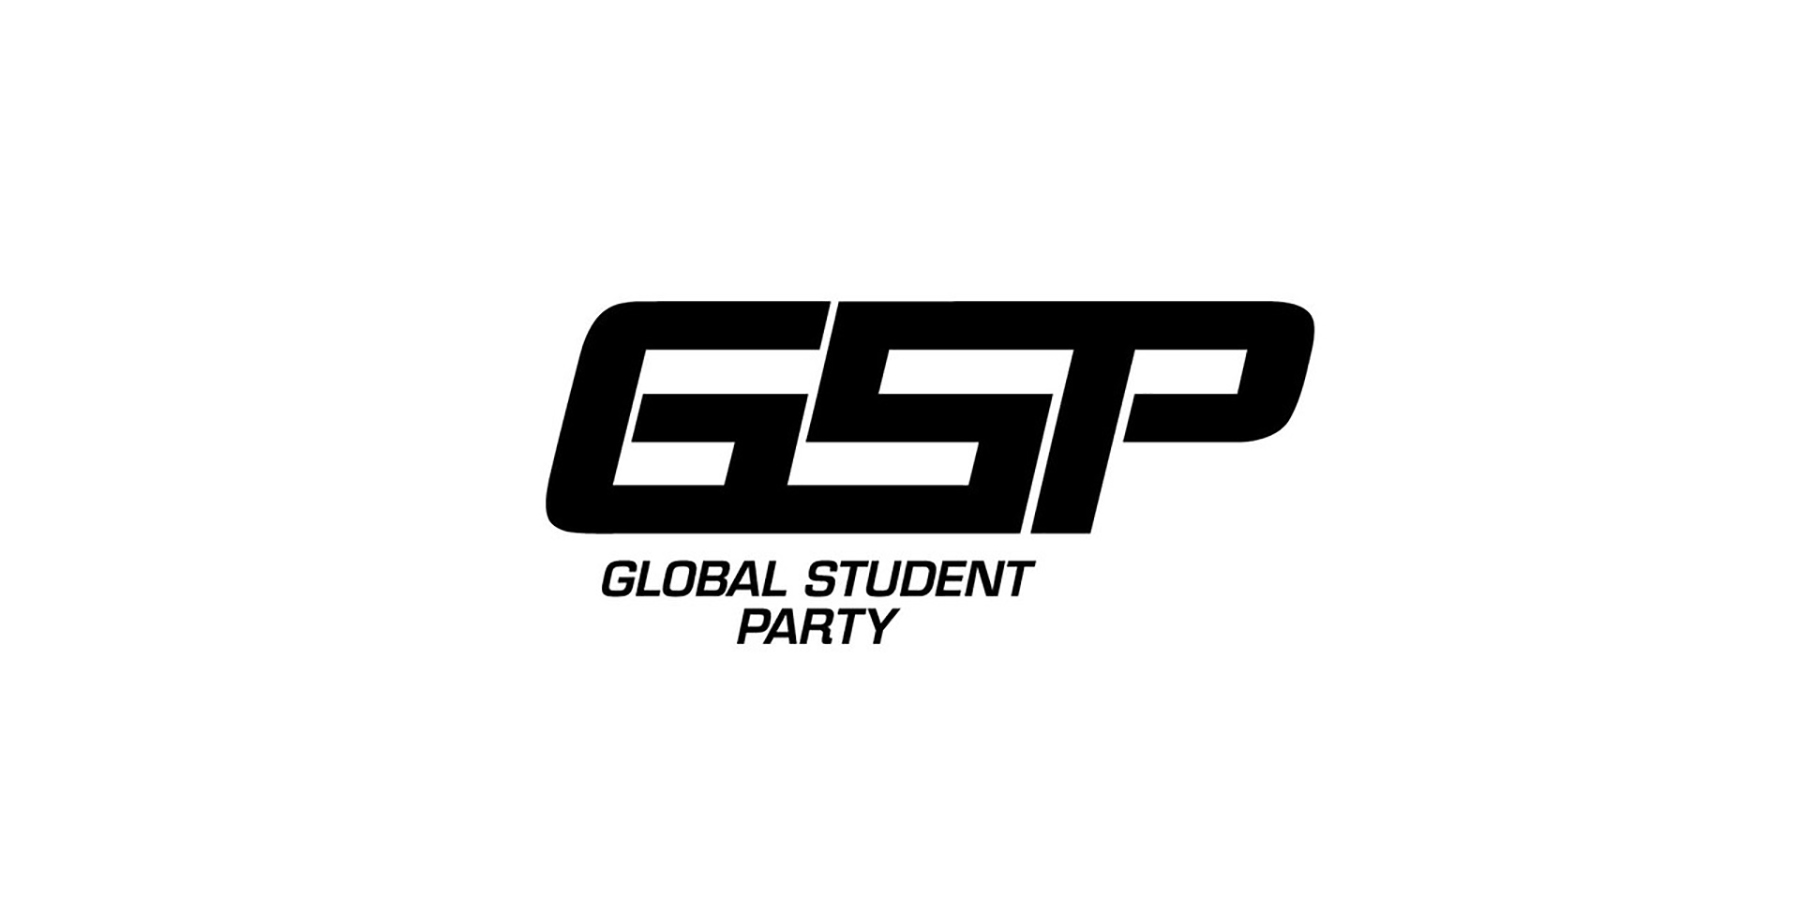 Global Student Party